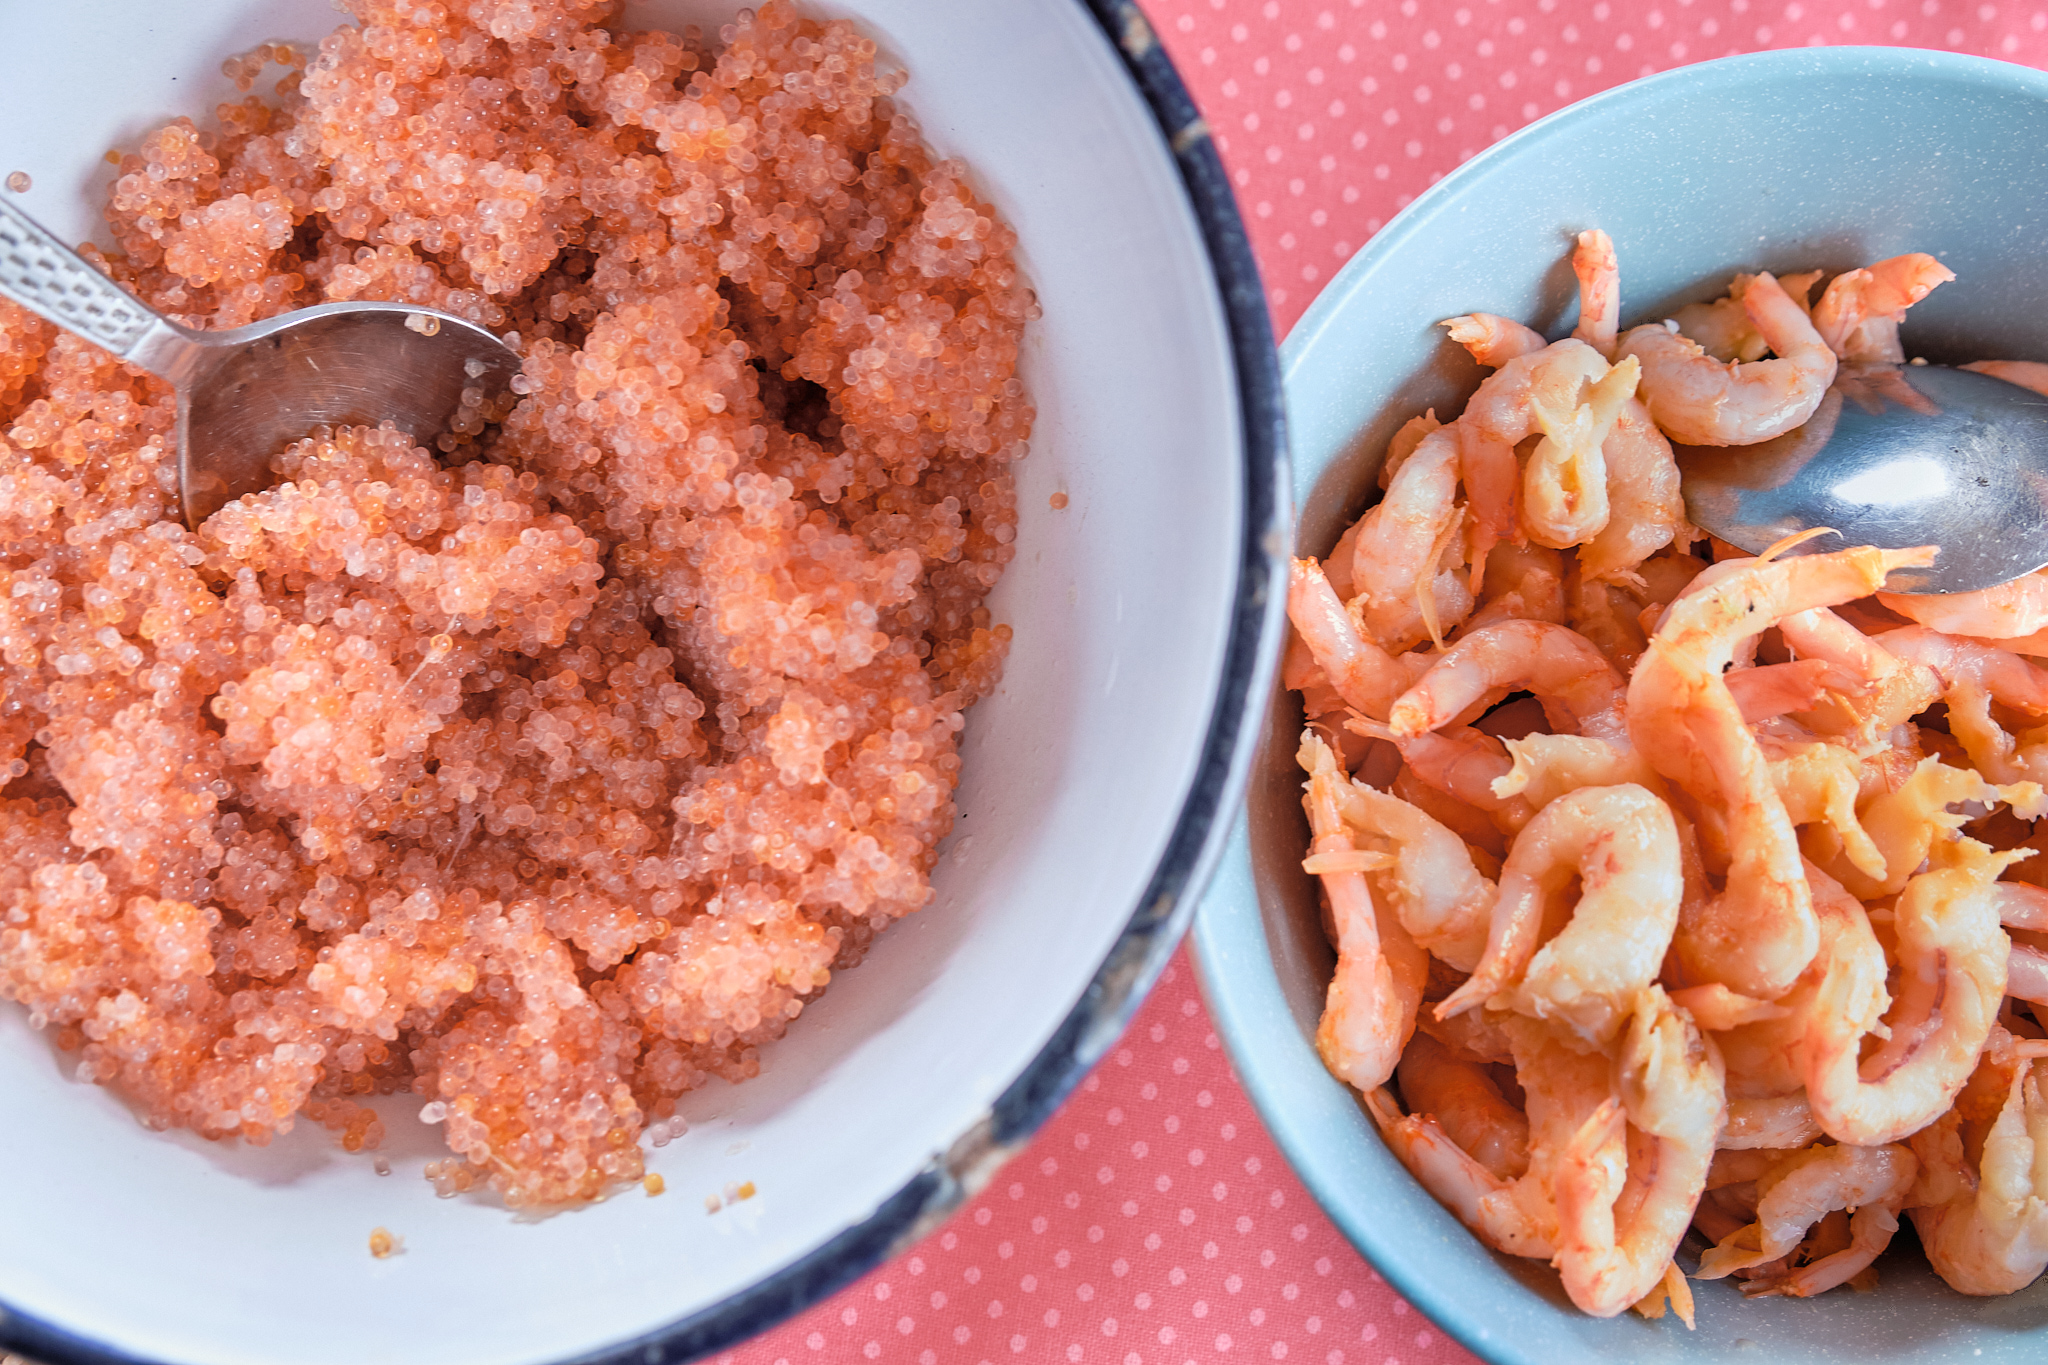 lumpfish roe and prawns for lunch at sassannguit near Sisimiut - Greenland